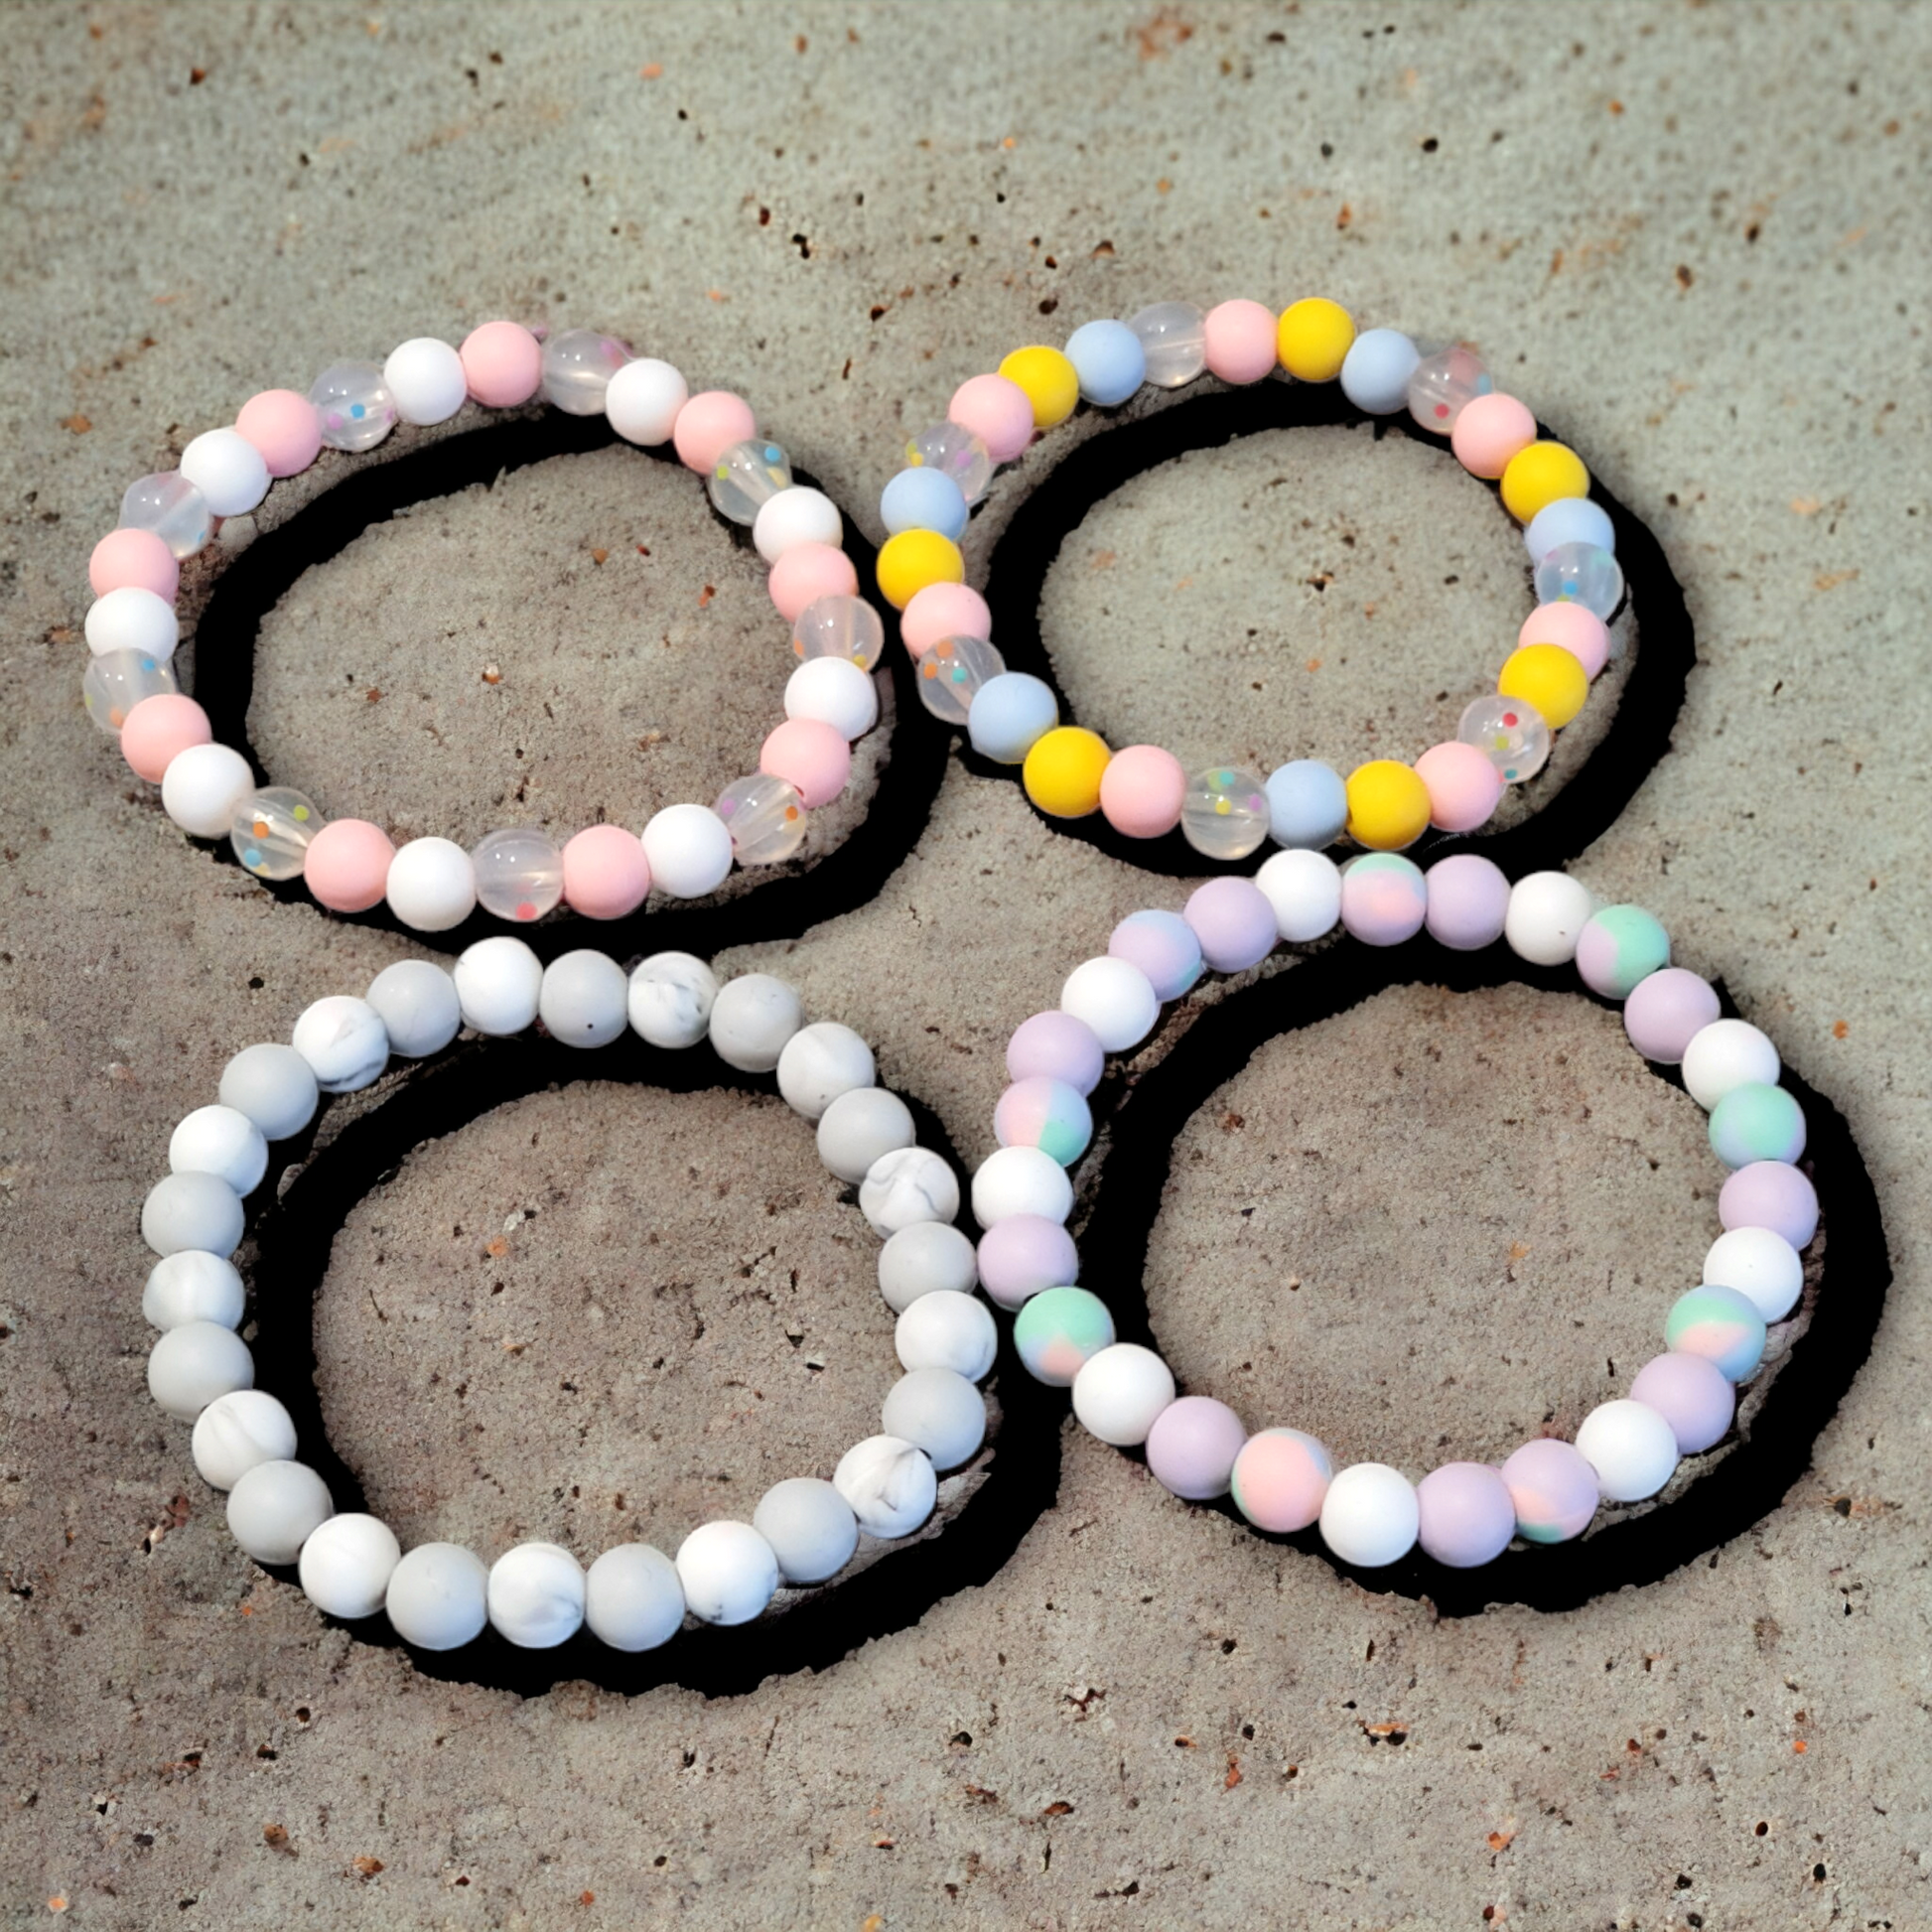 Beaded Anklets - Round Silicone Beads - PeppaTree Design Store